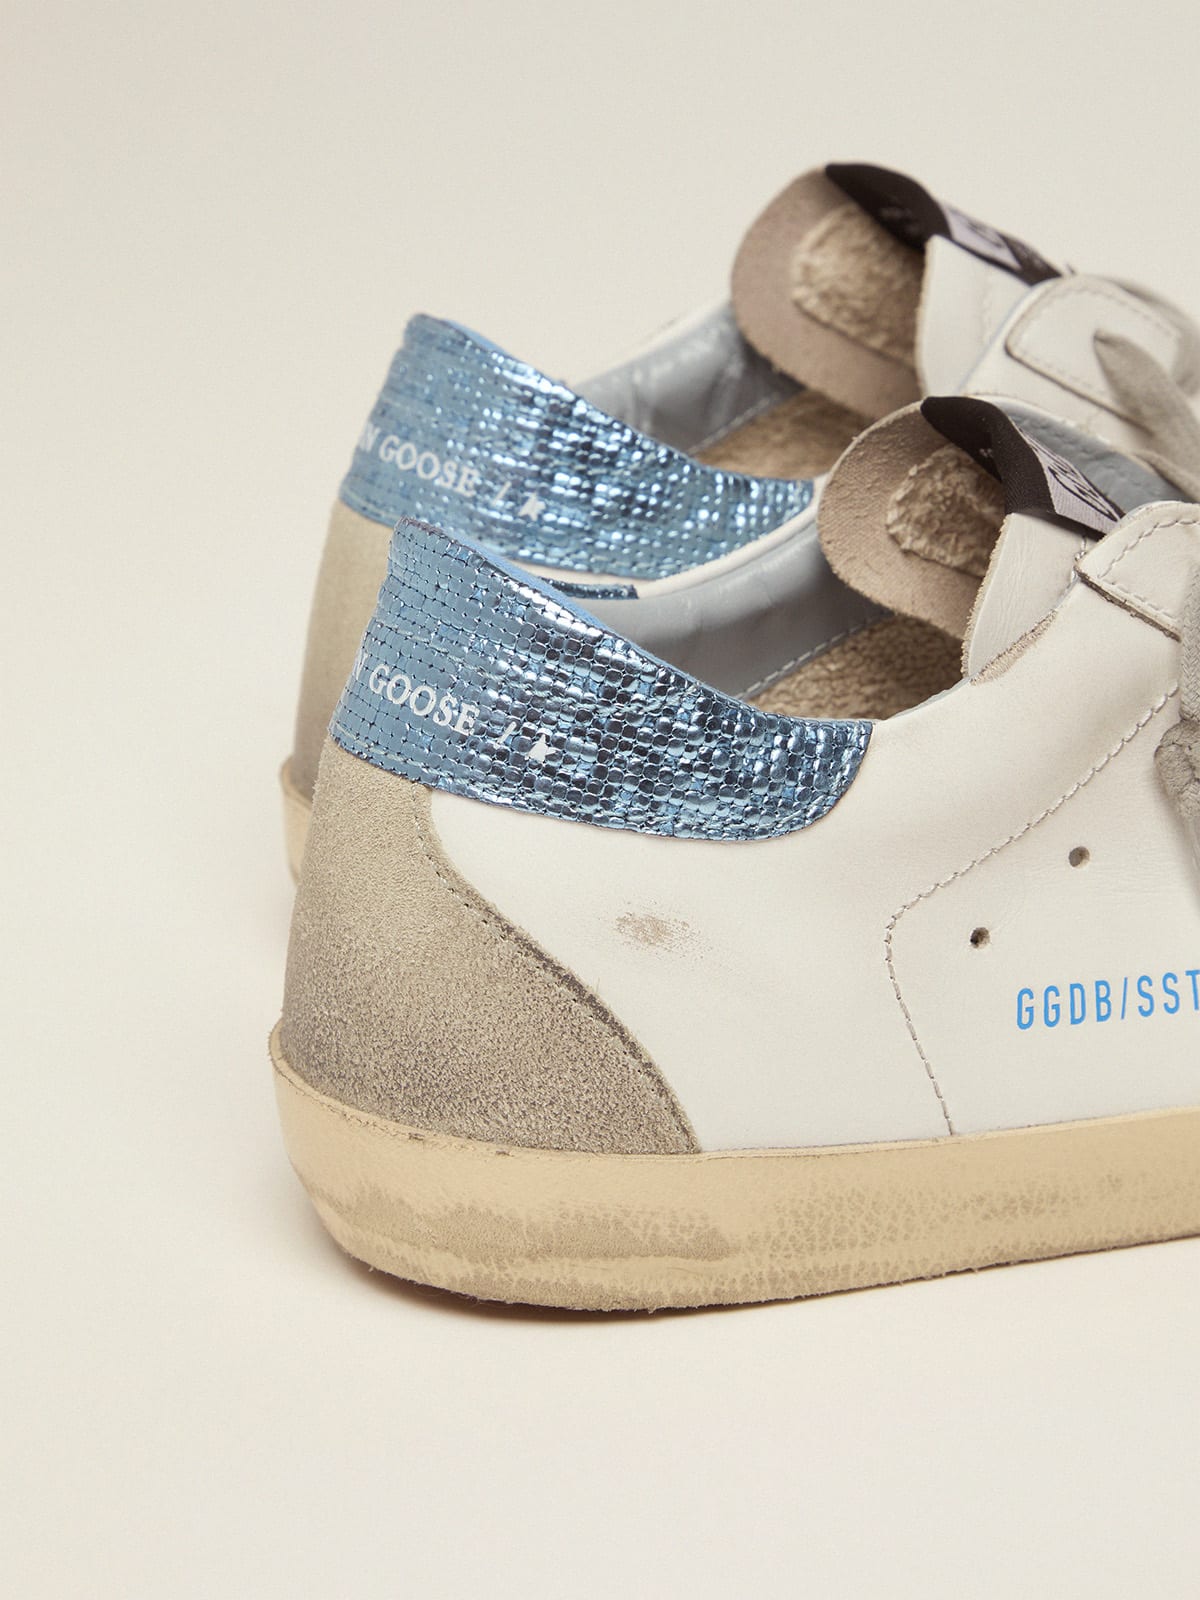 Golden Goose - White Super-Star LTD sneakers with blue laminated heel tab in 